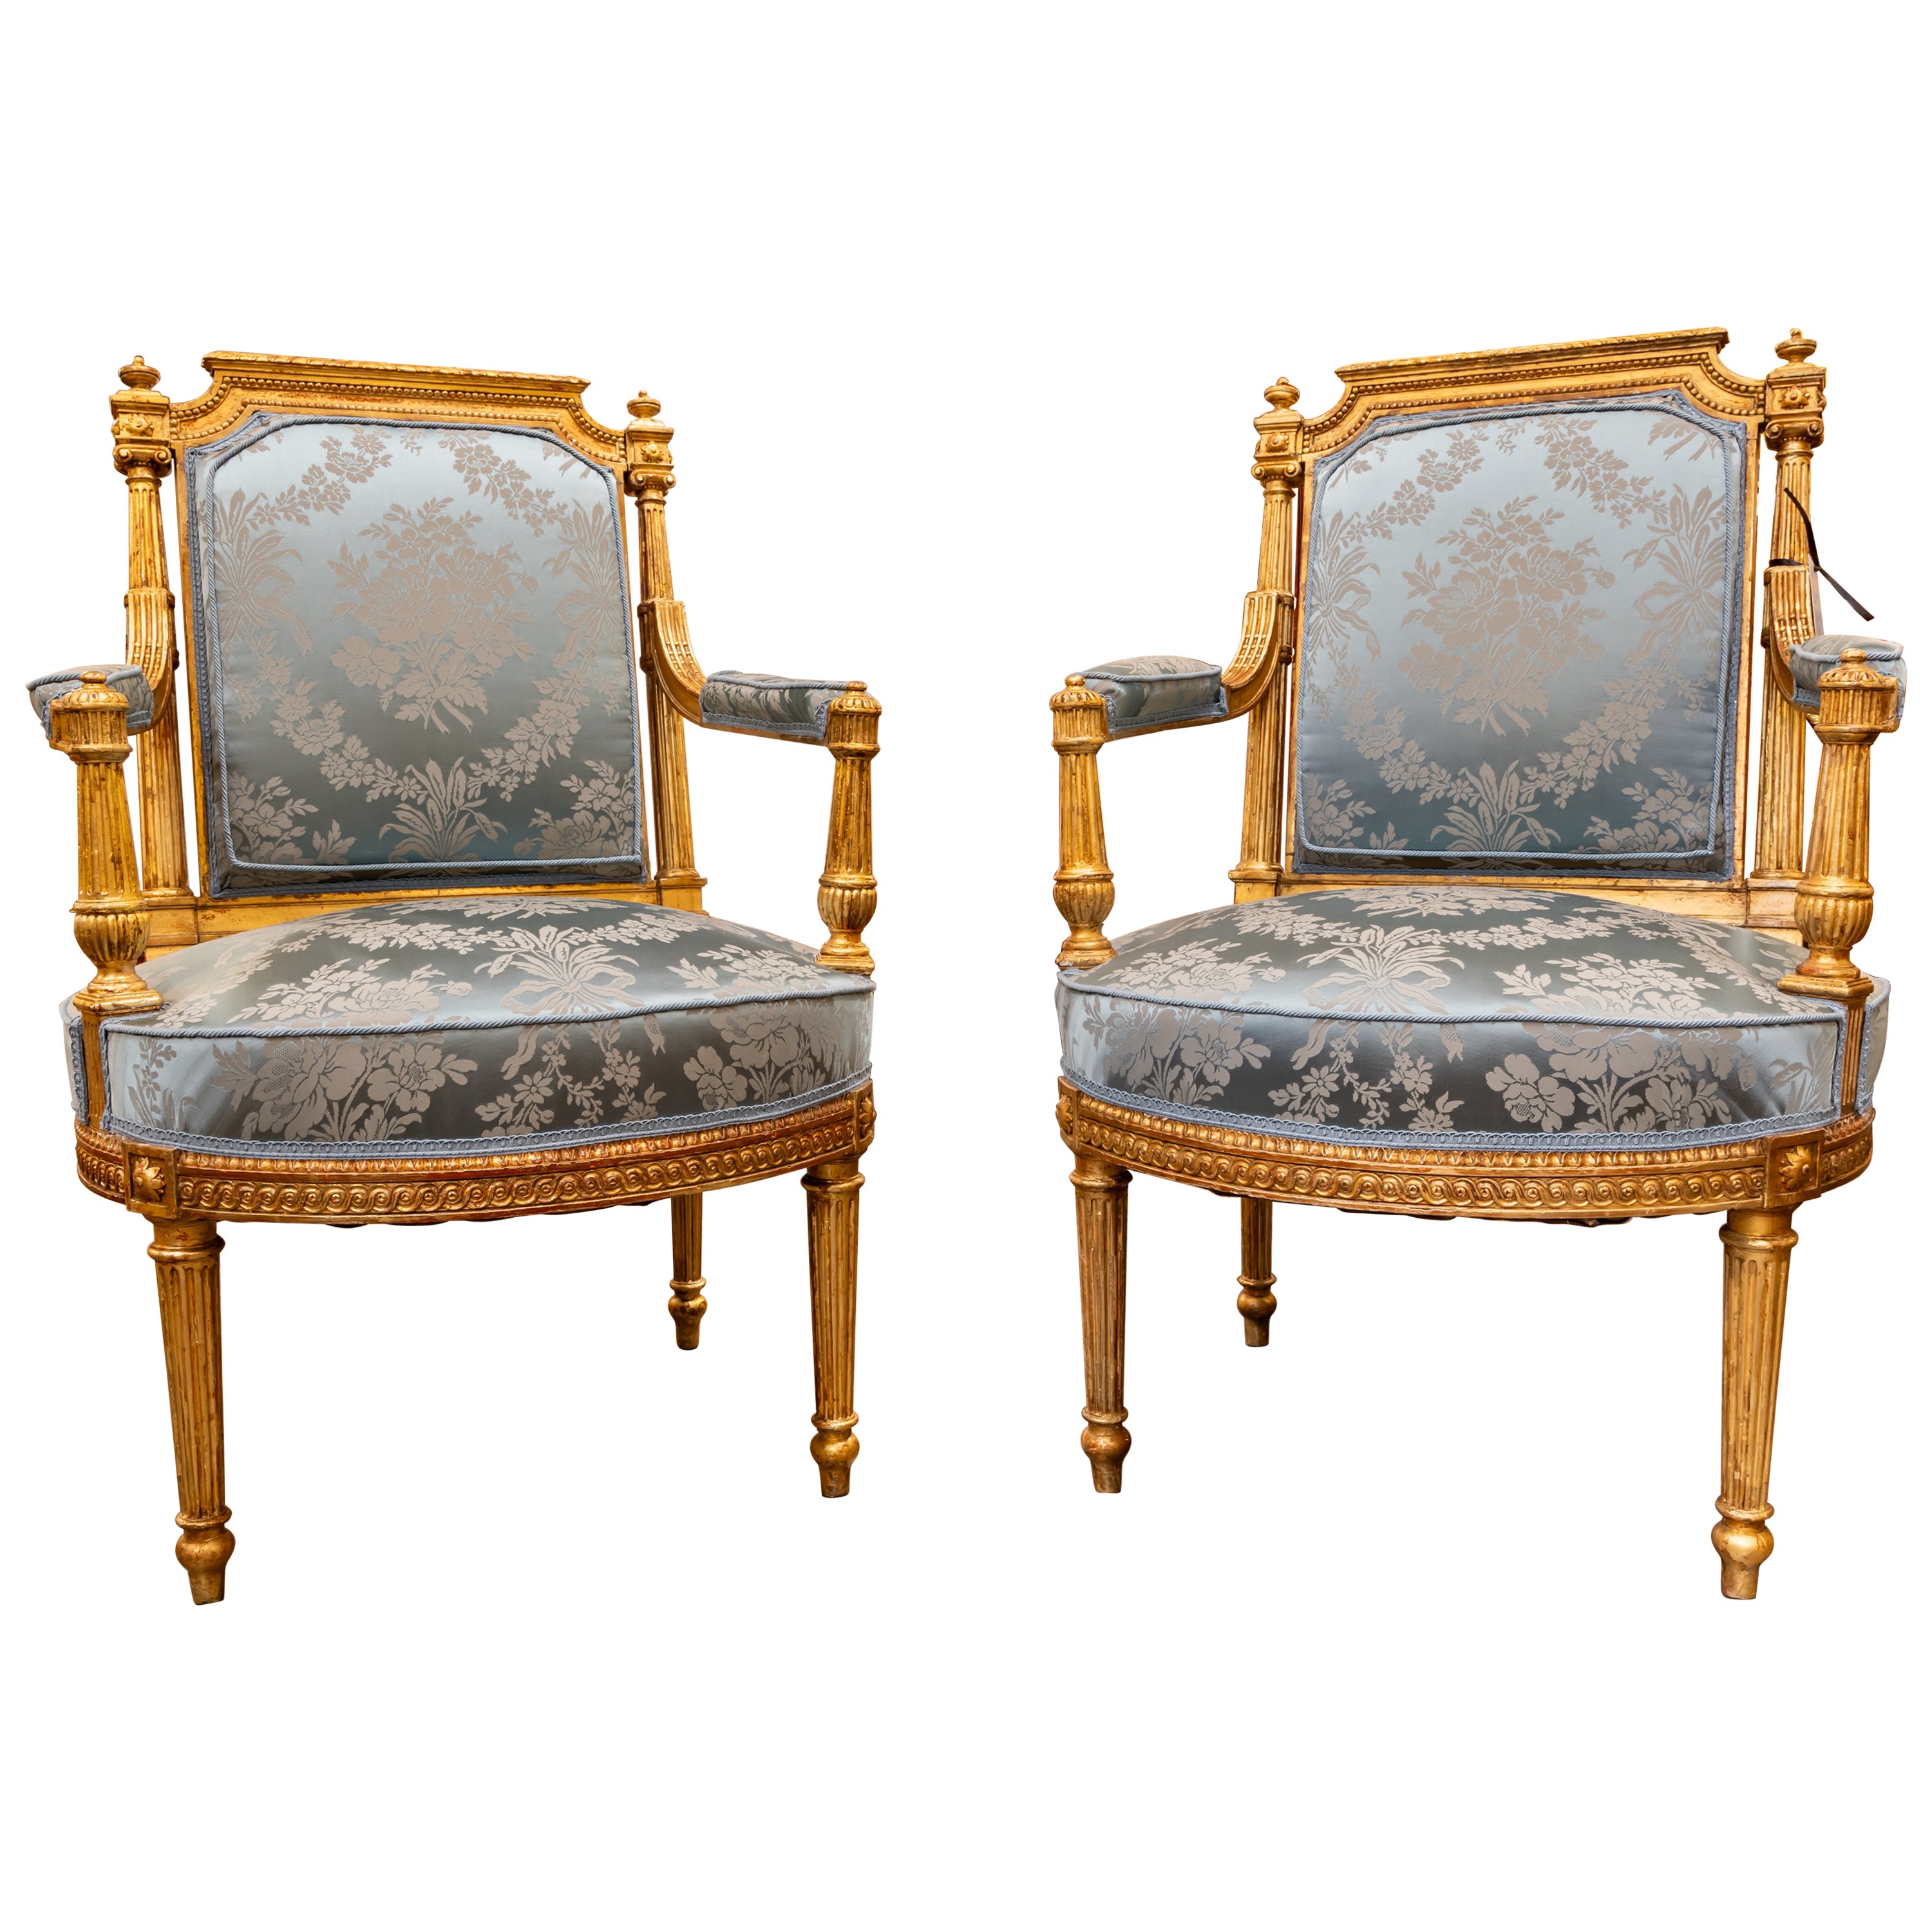 A fine pair of 19th century French Louis XVI hand carved and gilded armchairs. 